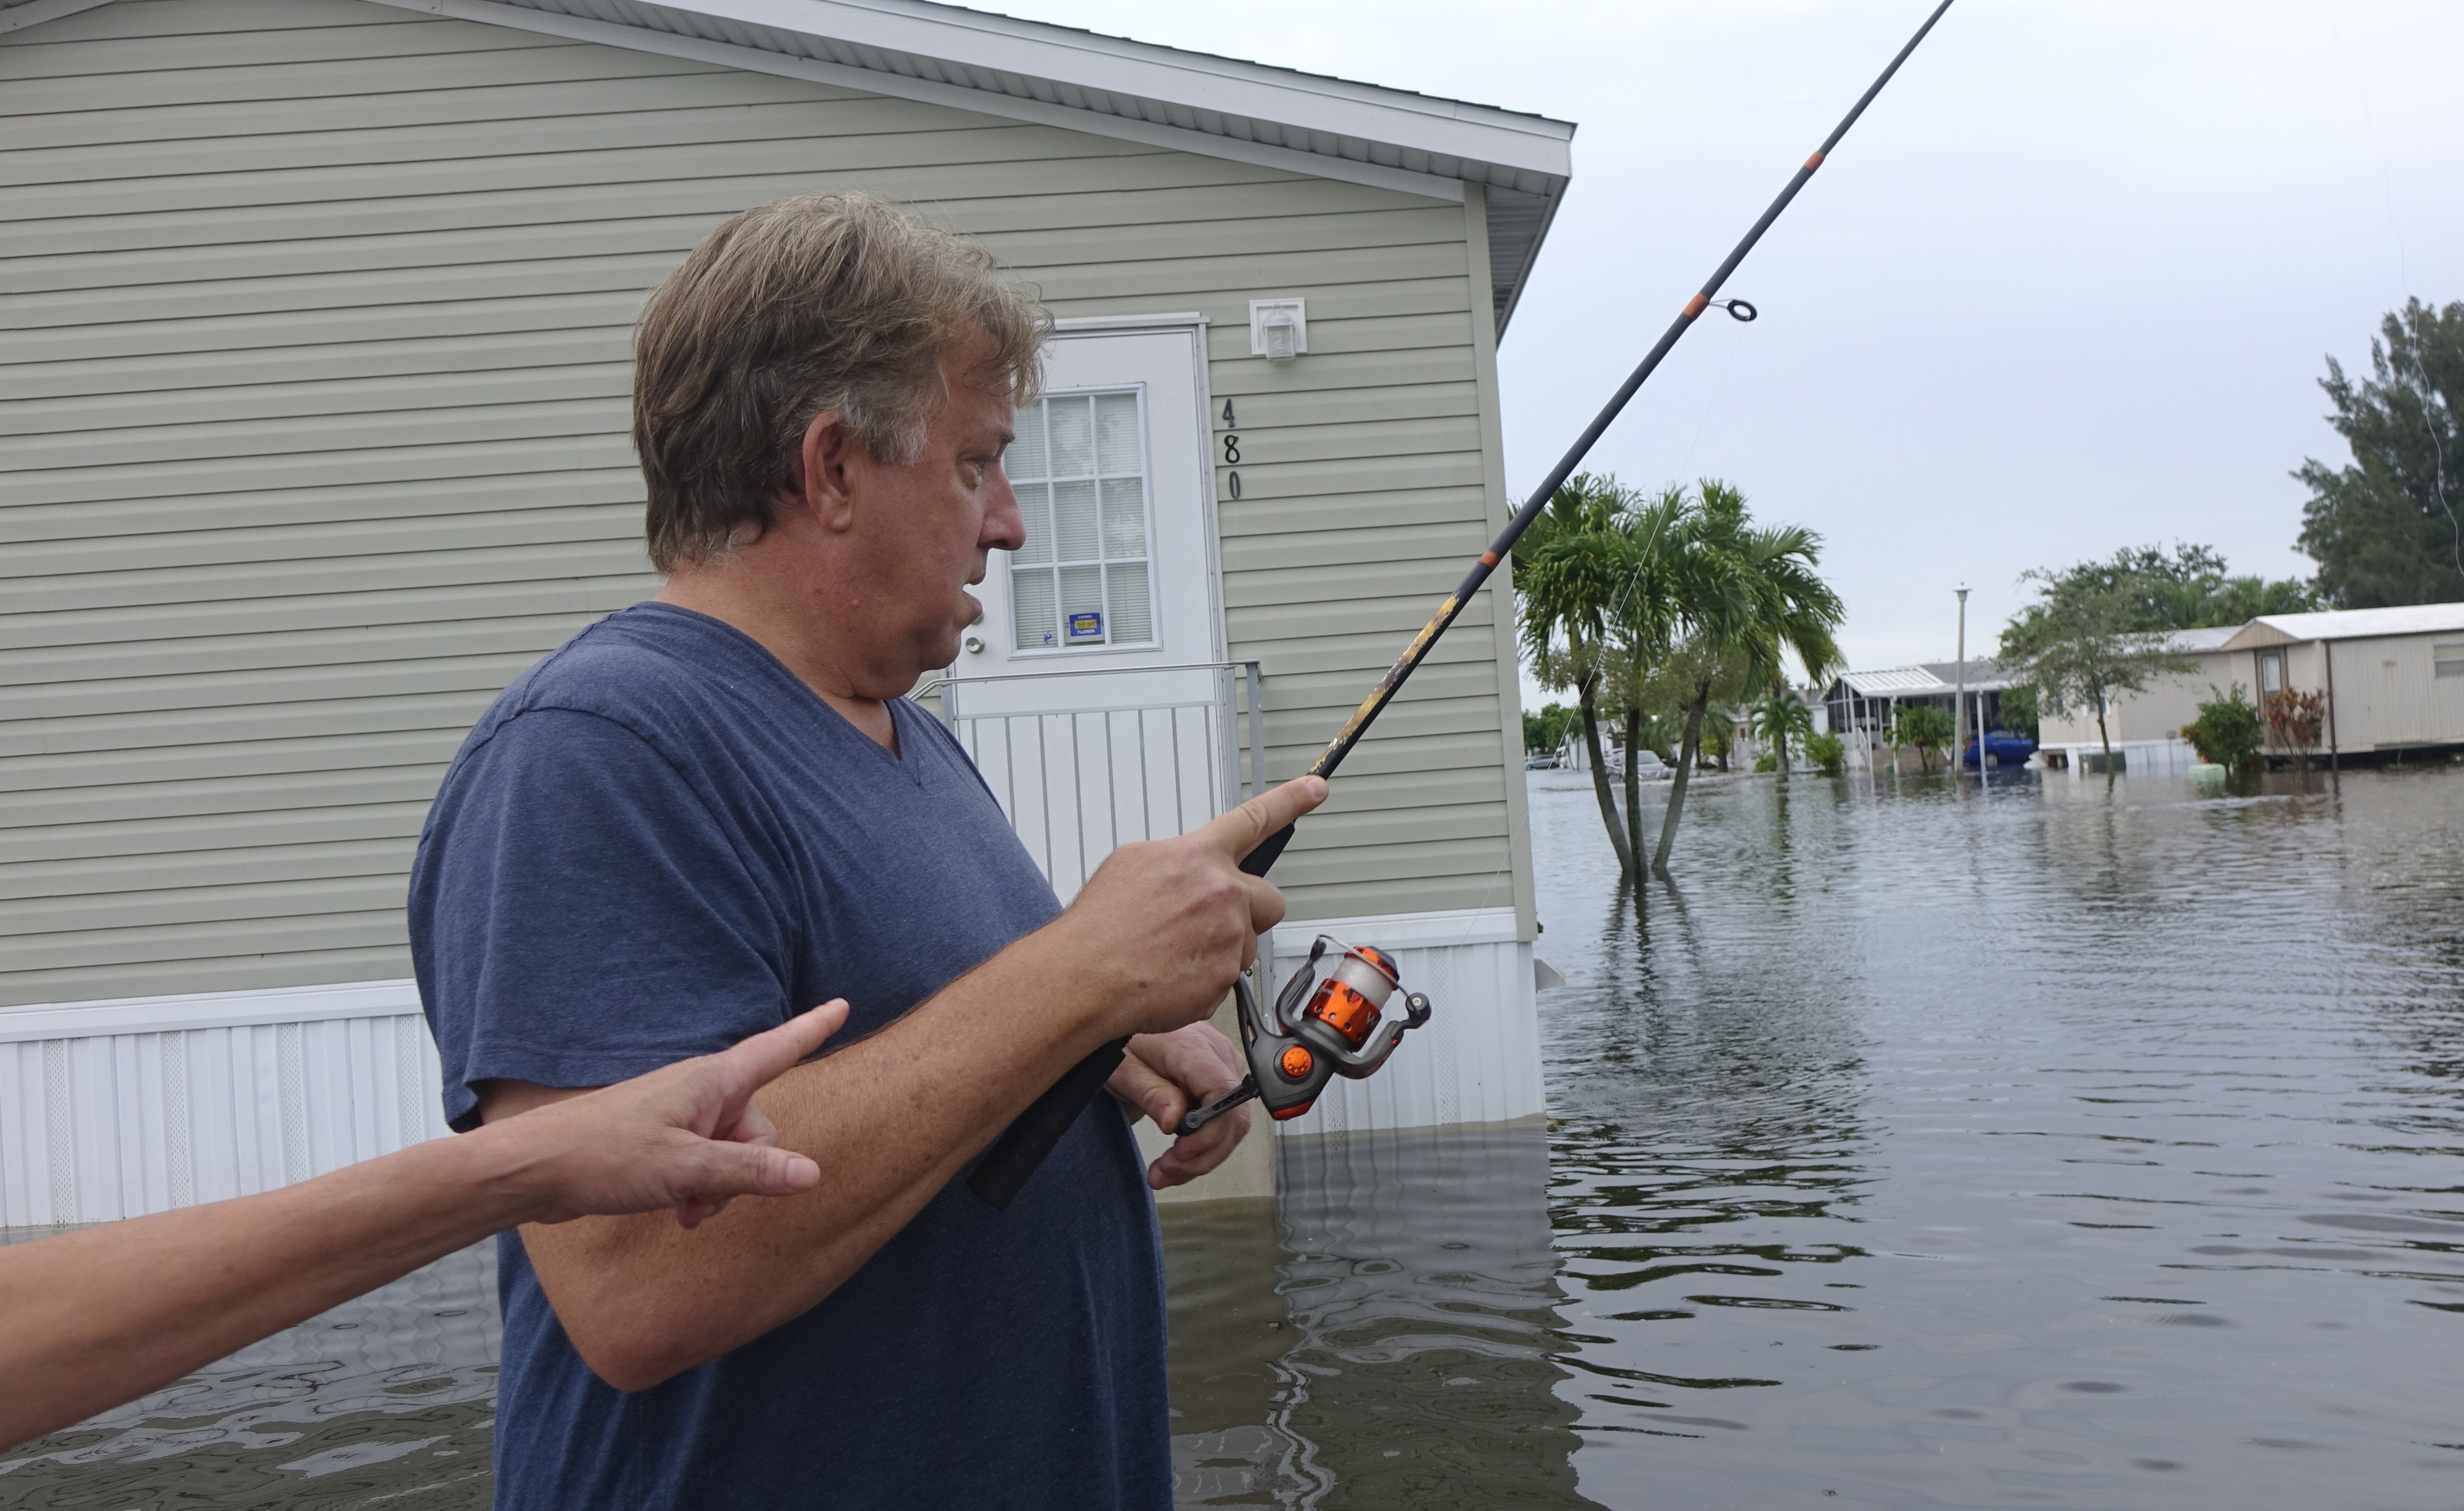 Mike Lemmerman tries his luck fishing on a flooded SW 5th St., in Sunshine Village, Wednesday, June 7, 2017, in Davie, Fla. Several days of constant rain has caused flooding throughout Broward and Palm Beach Counties. (Joe Cavaretta/South Florida Sun-Sentinel via AP)